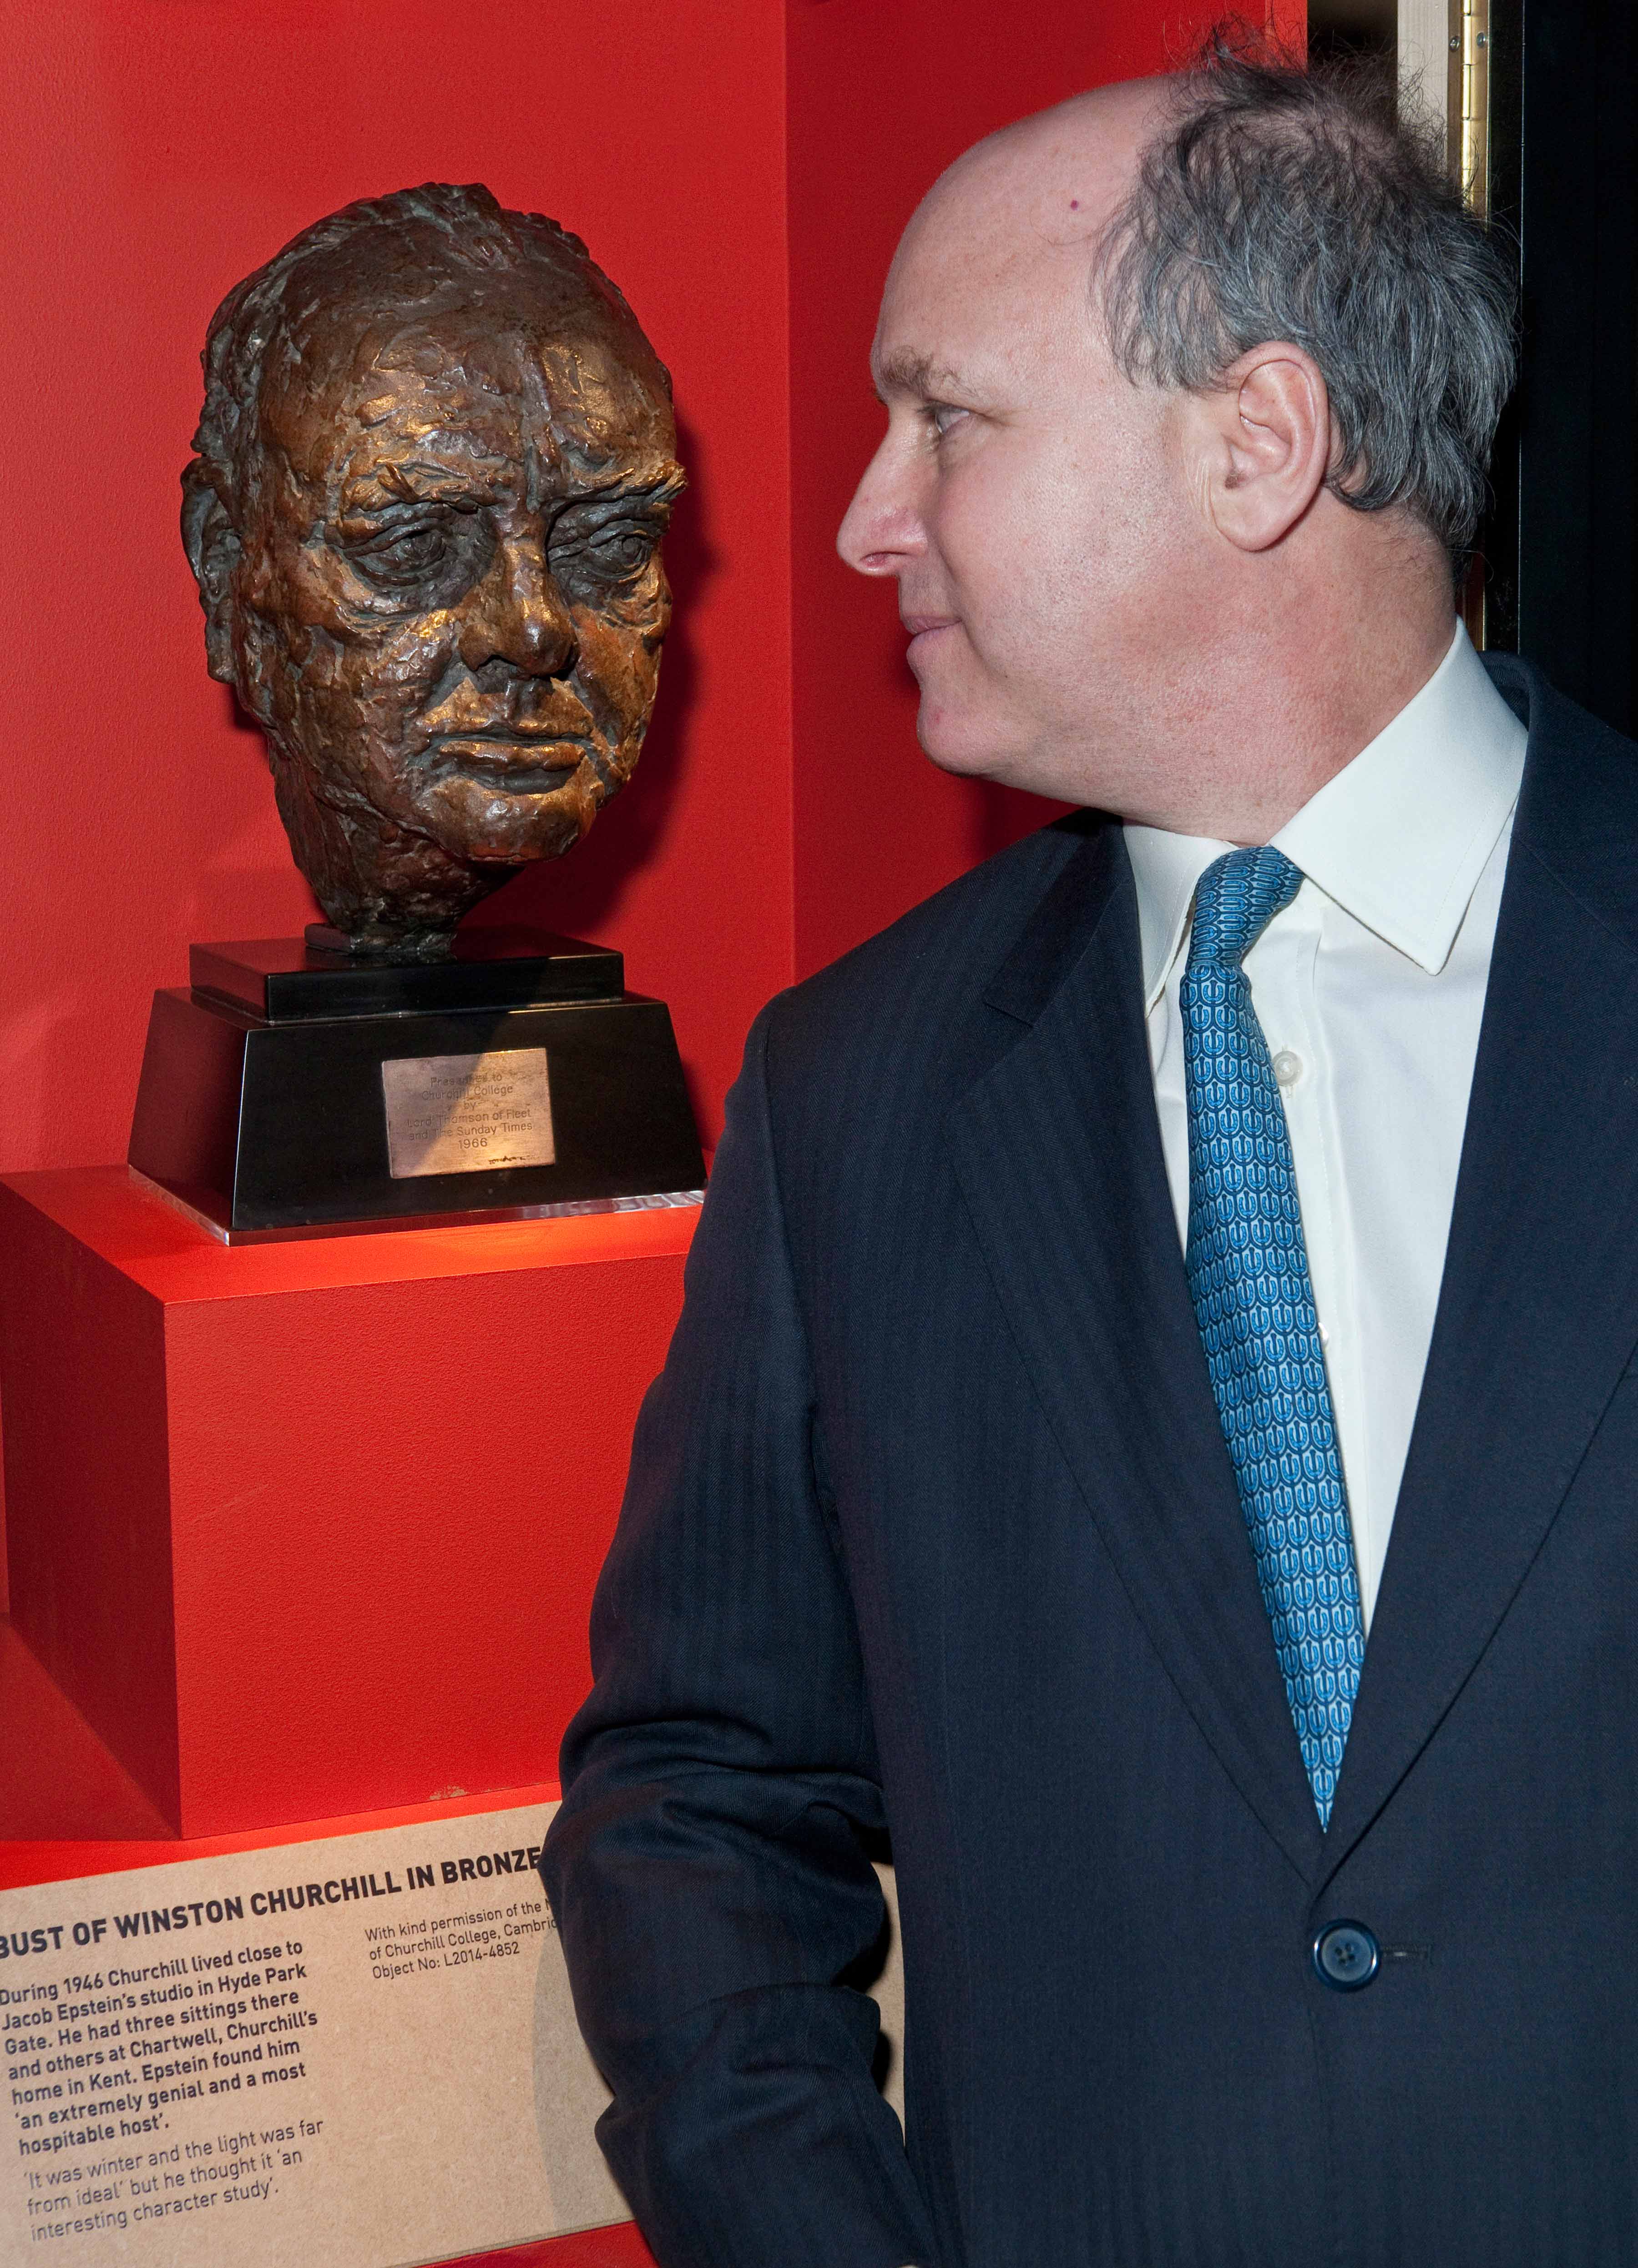 Randolph Churchill examines a Jacob Epstein bust of Sir Winston Churchill. Image credit: Science Museum